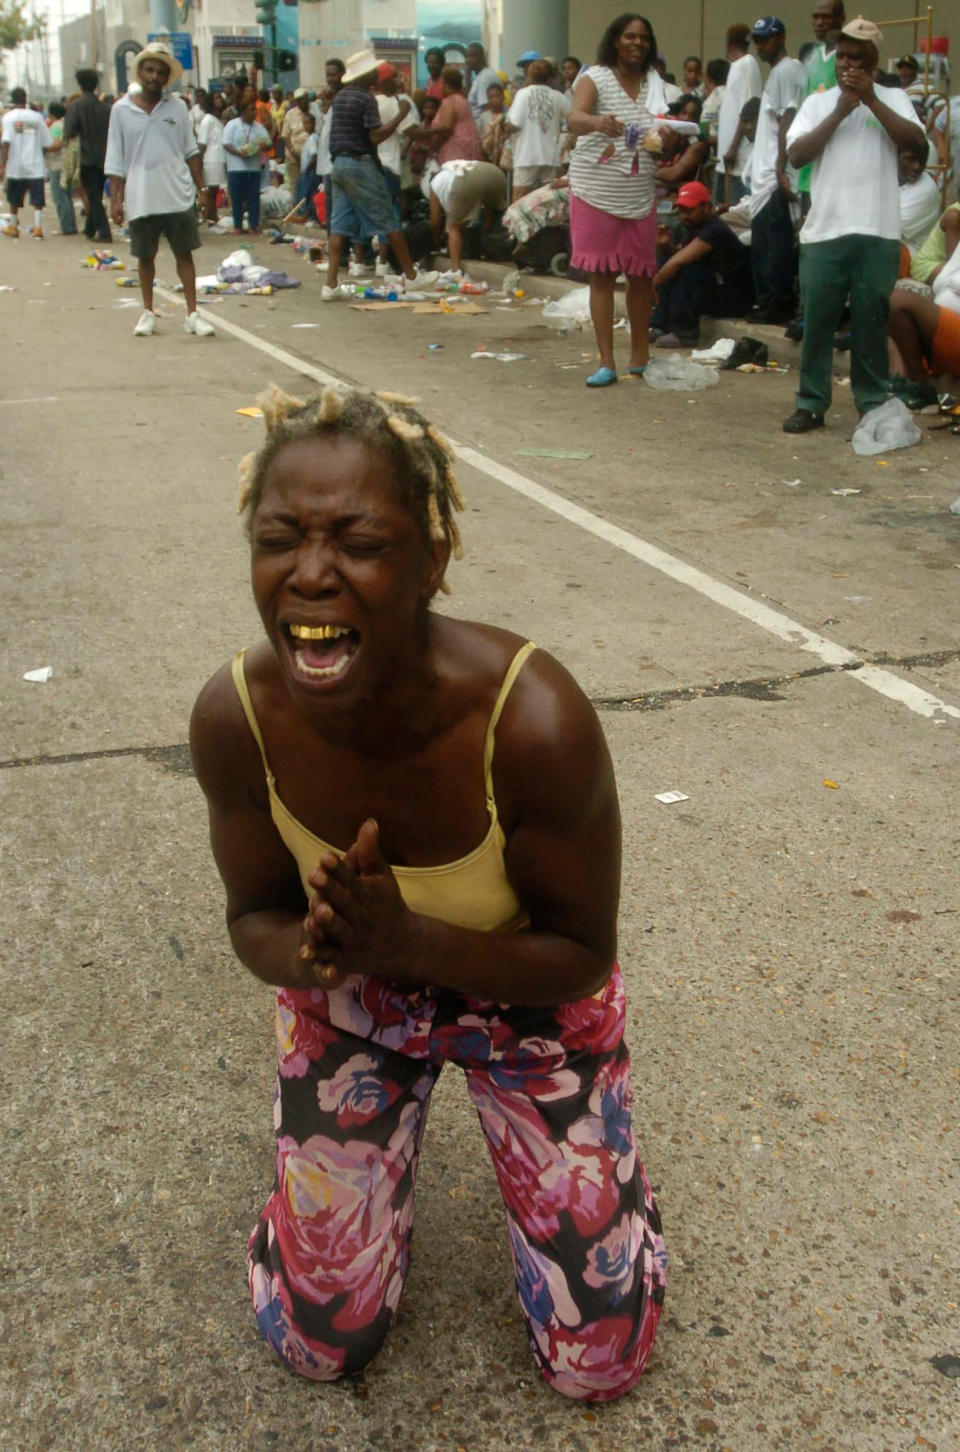 Angela Perkins drops to her knees asking for help among thousands of people gathered at the New Orleans Convention Center waiting in the aftermath of Hurricane Katrina on Sept. 1, 2005<span class="copyright">Melissa Phillip—Houston Chronicle/AP</span>